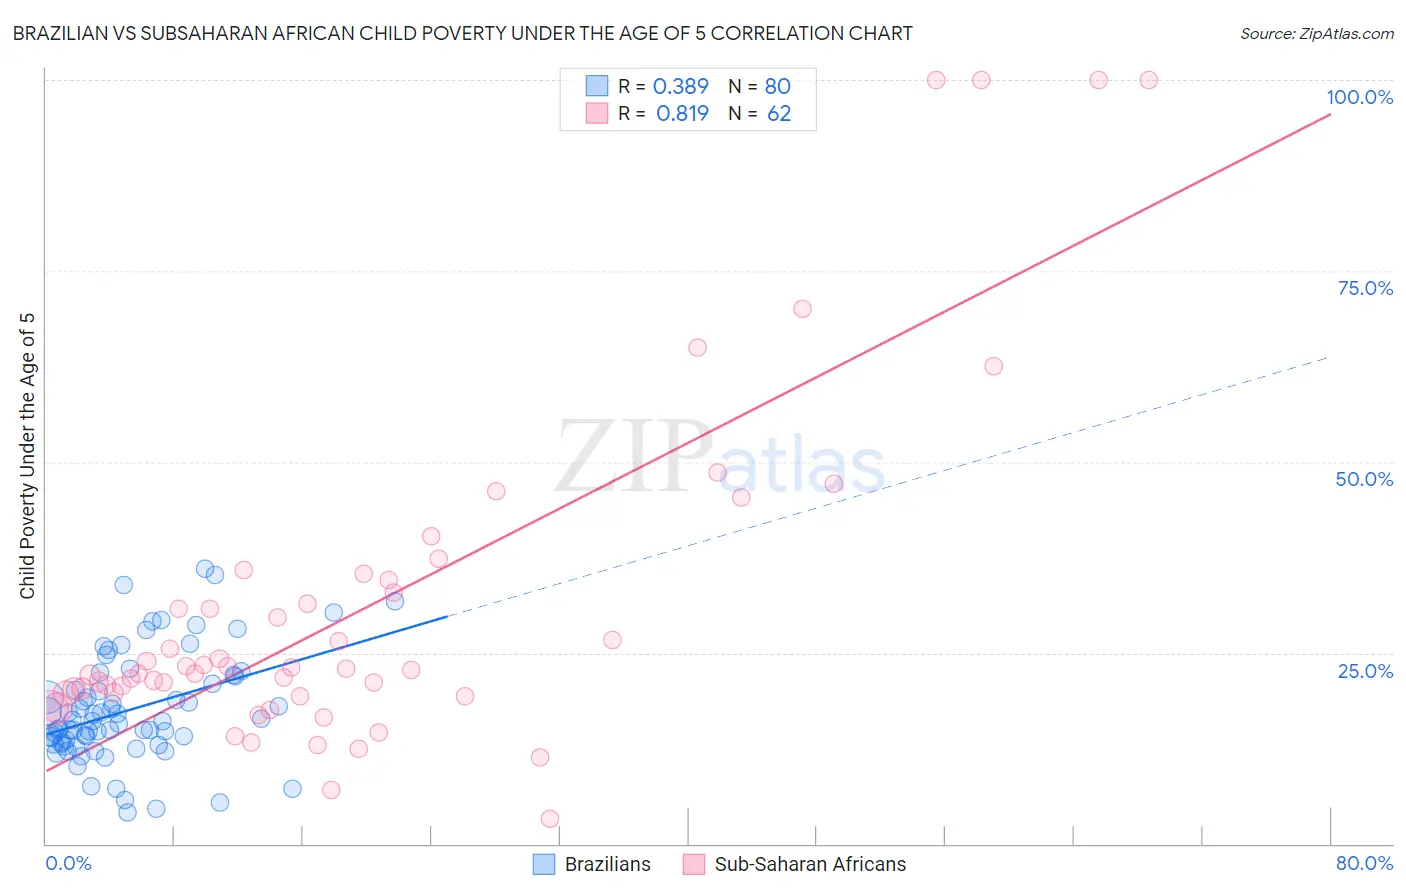 Brazilian vs Subsaharan African Child Poverty Under the Age of 5